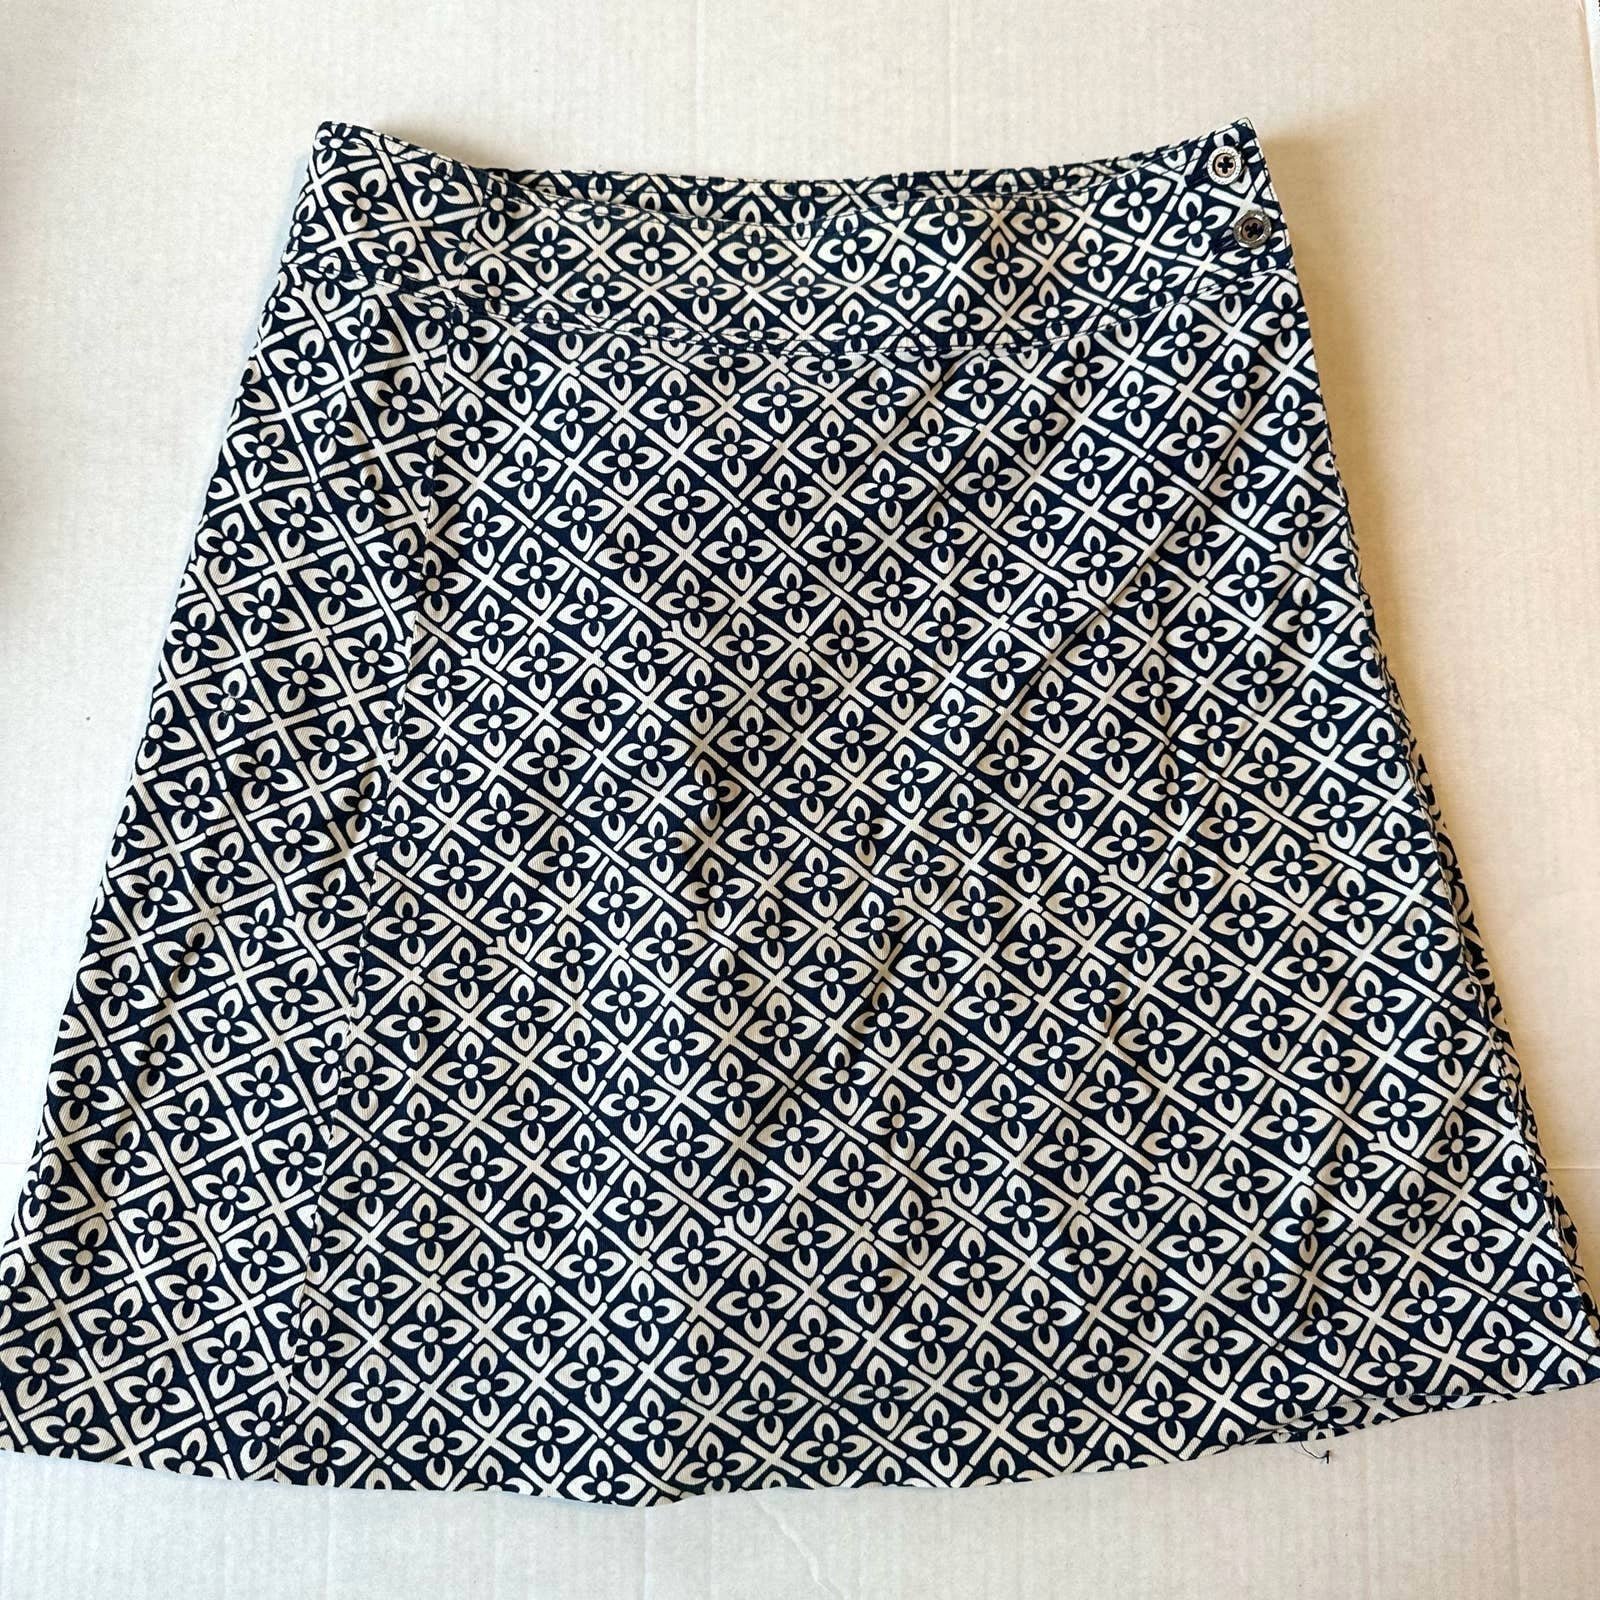 Amazing Lilly Pulitzer Floral A-Line Wrap Skirt Sz 4 kiQ2lUD4K just buy it